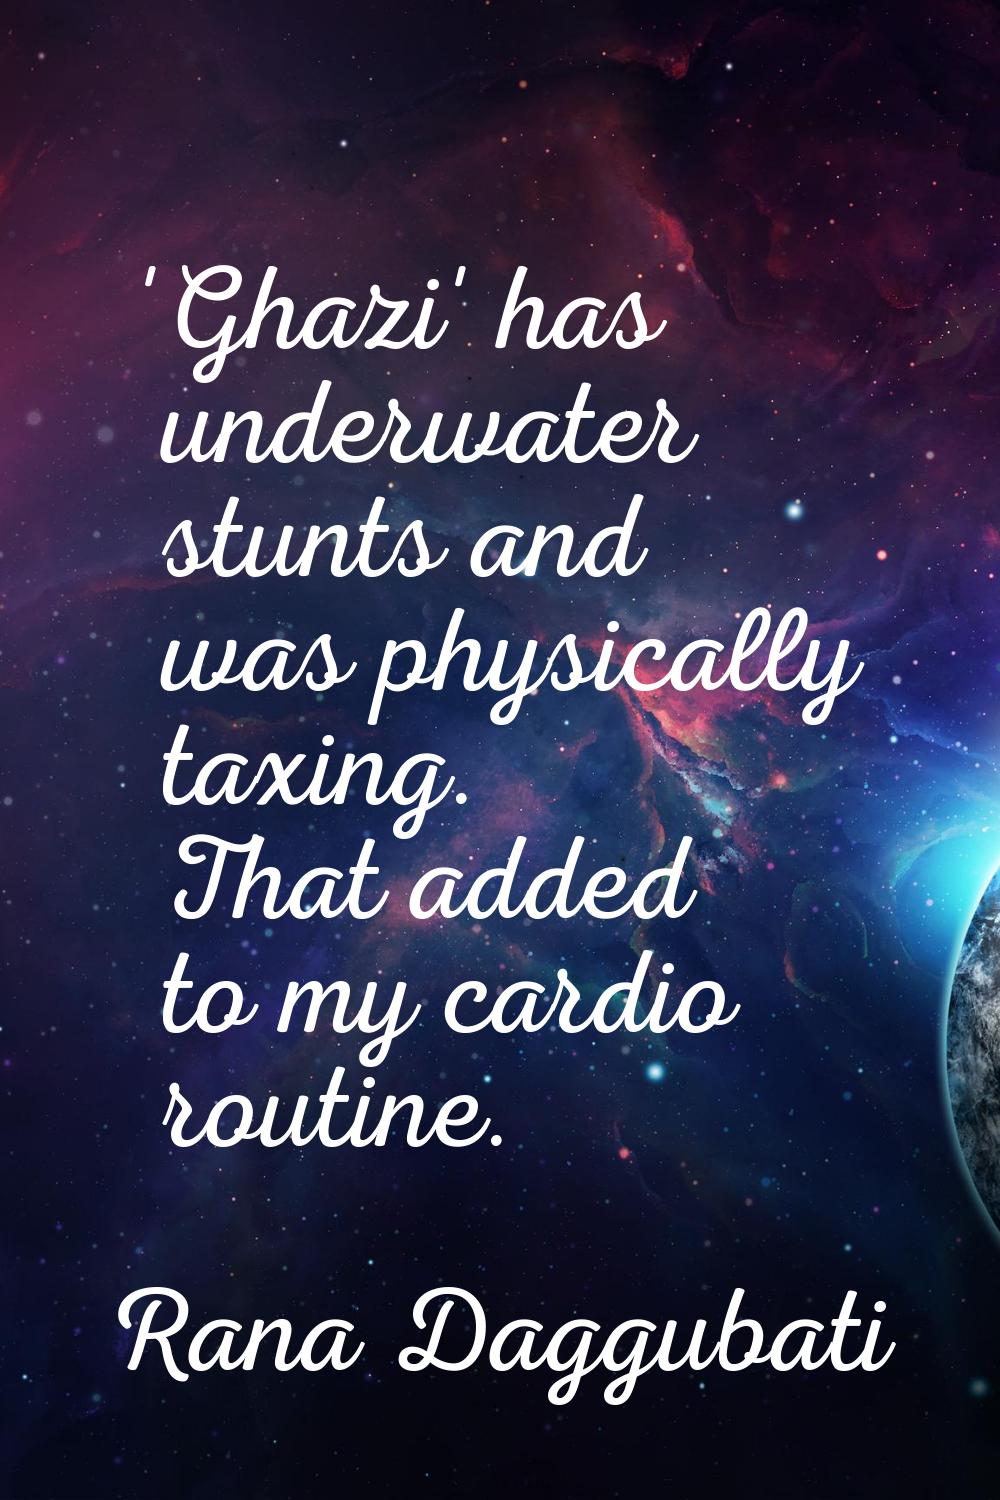 'Ghazi' has underwater stunts and was physically taxing. That added to my cardio routine.